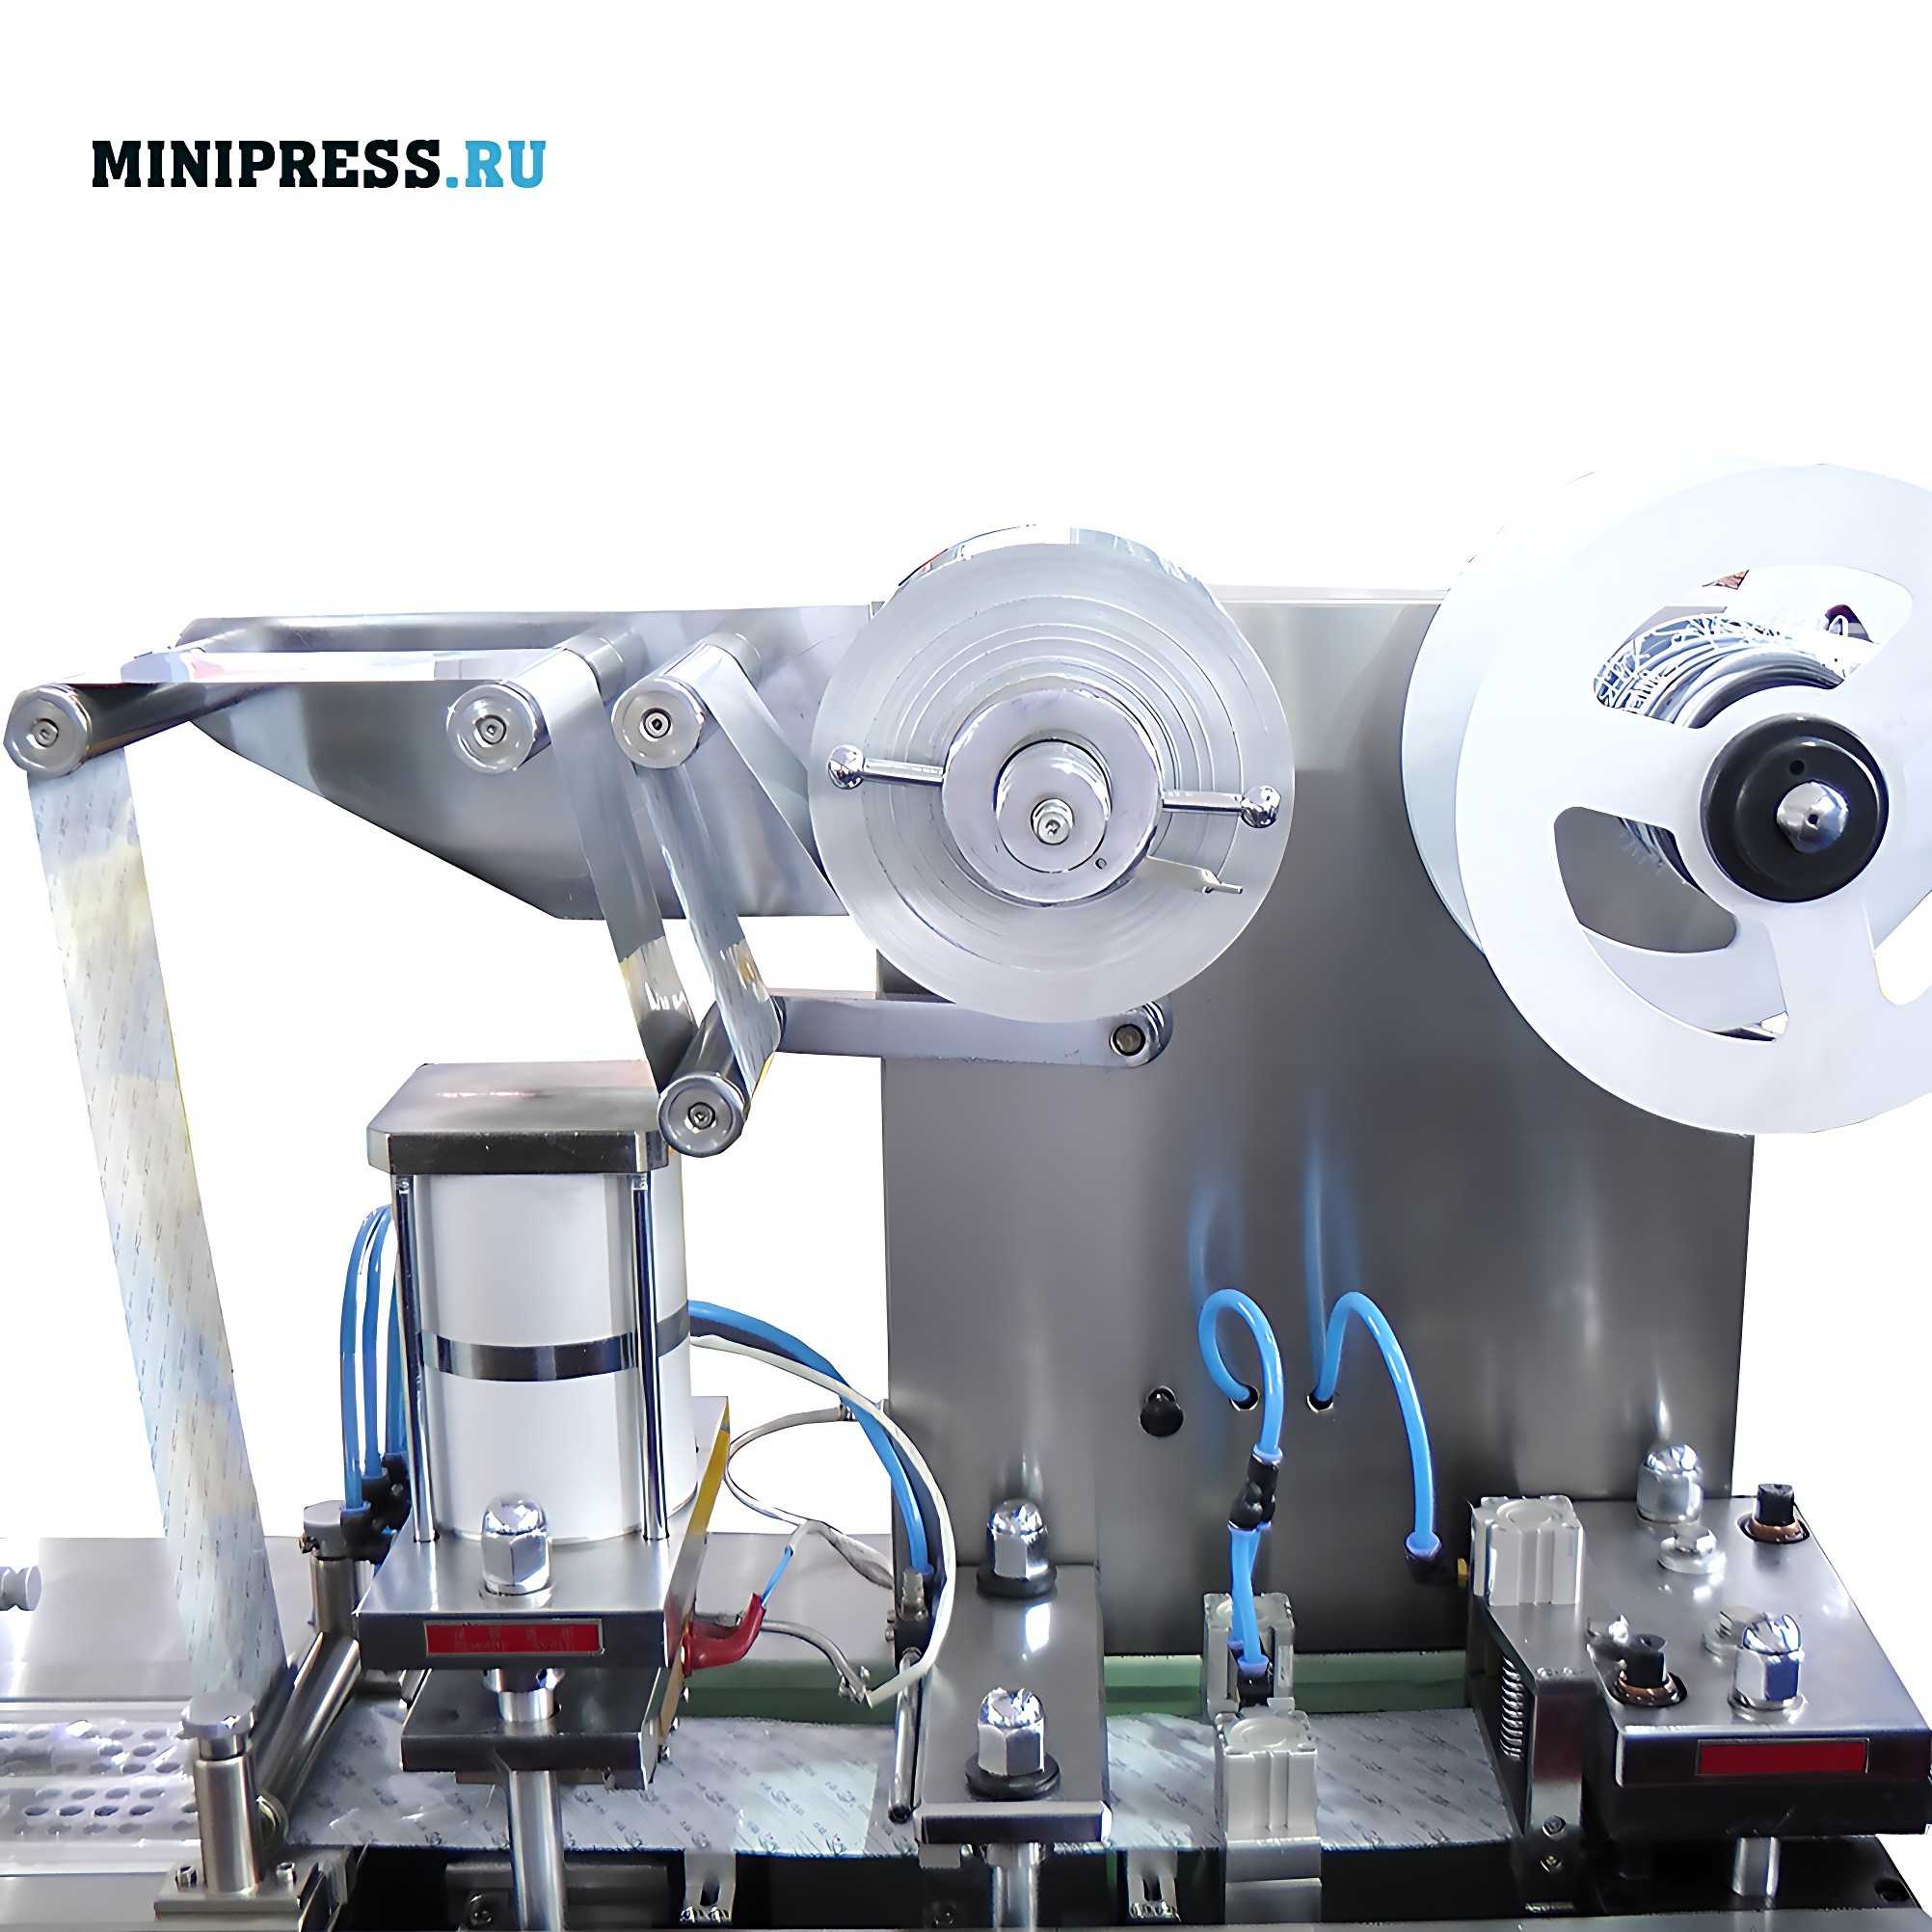 Tablet and capsule blister packing machine MN-14